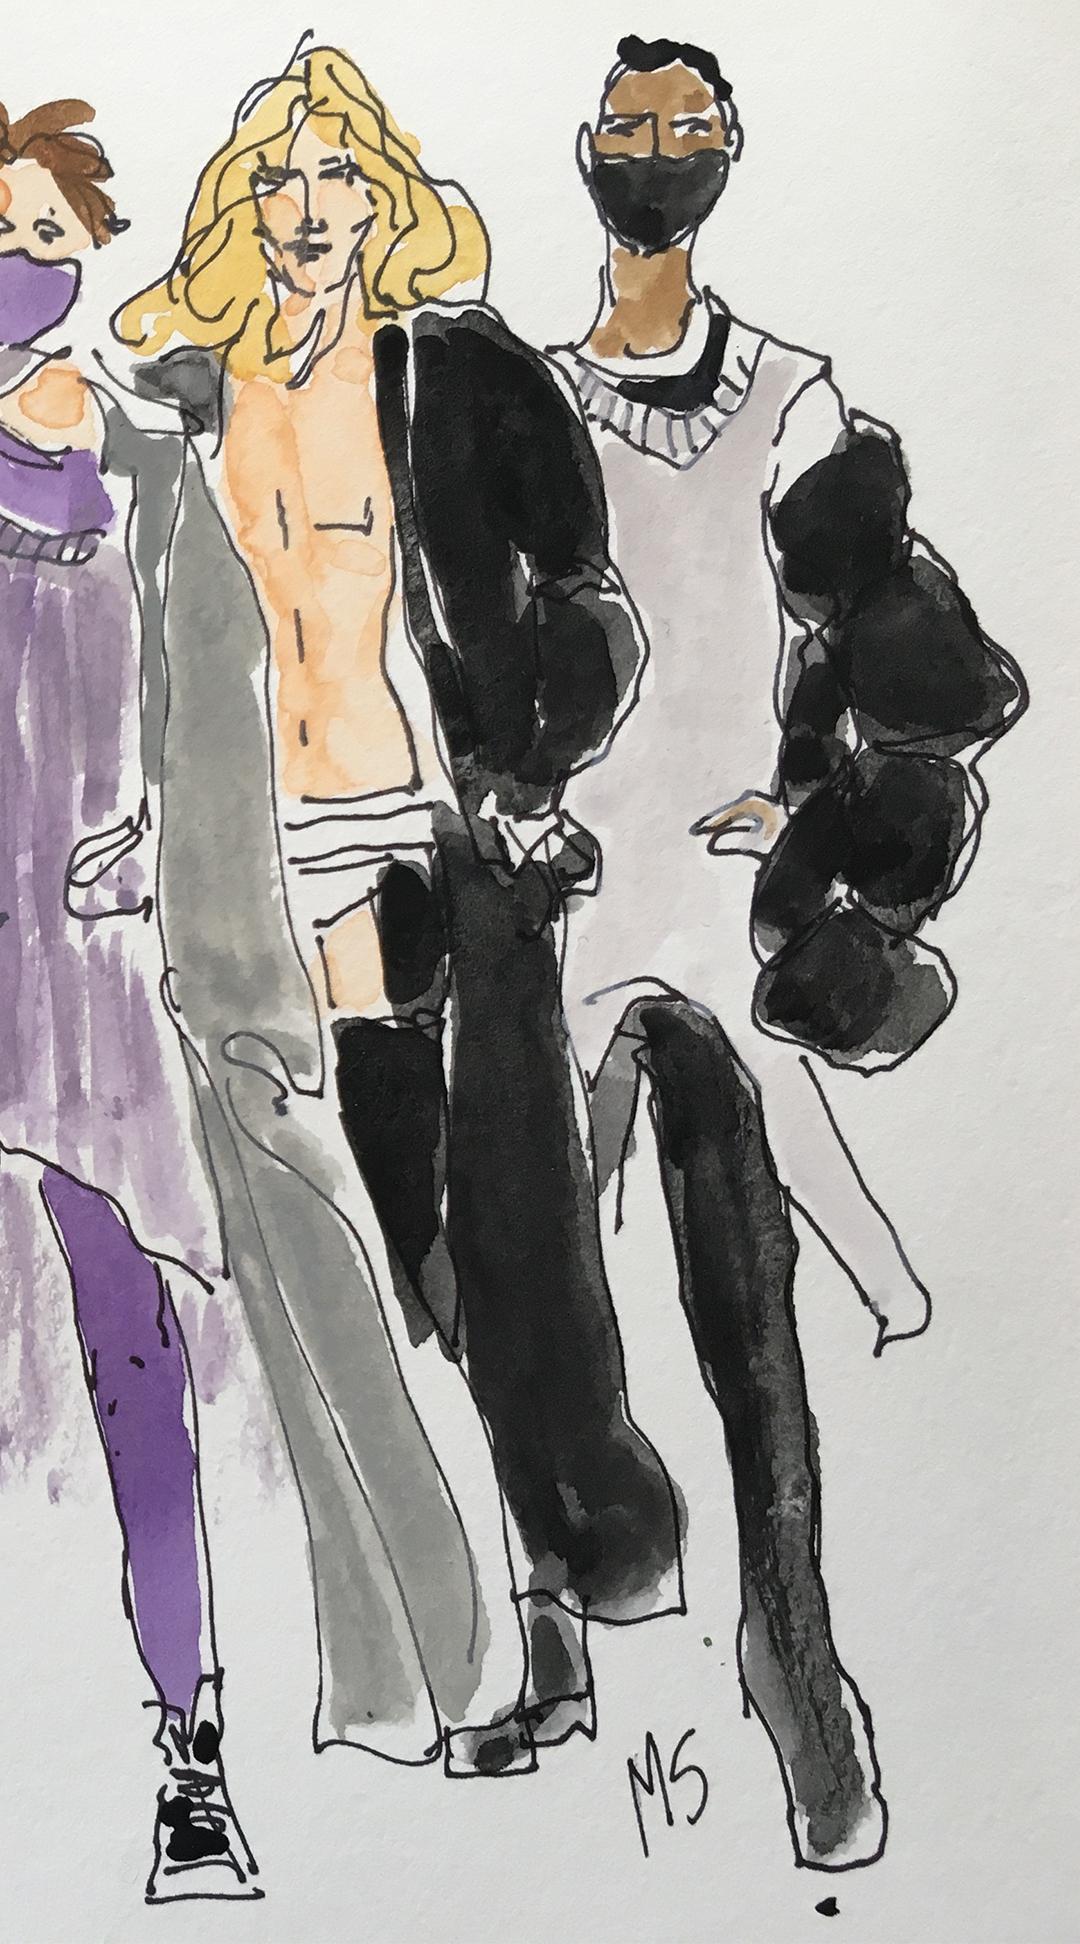 Designer Gareth Pugh, Fashion show models 2021. Watercolor drawing on paper - Contemporary Art by Manuel Santelices